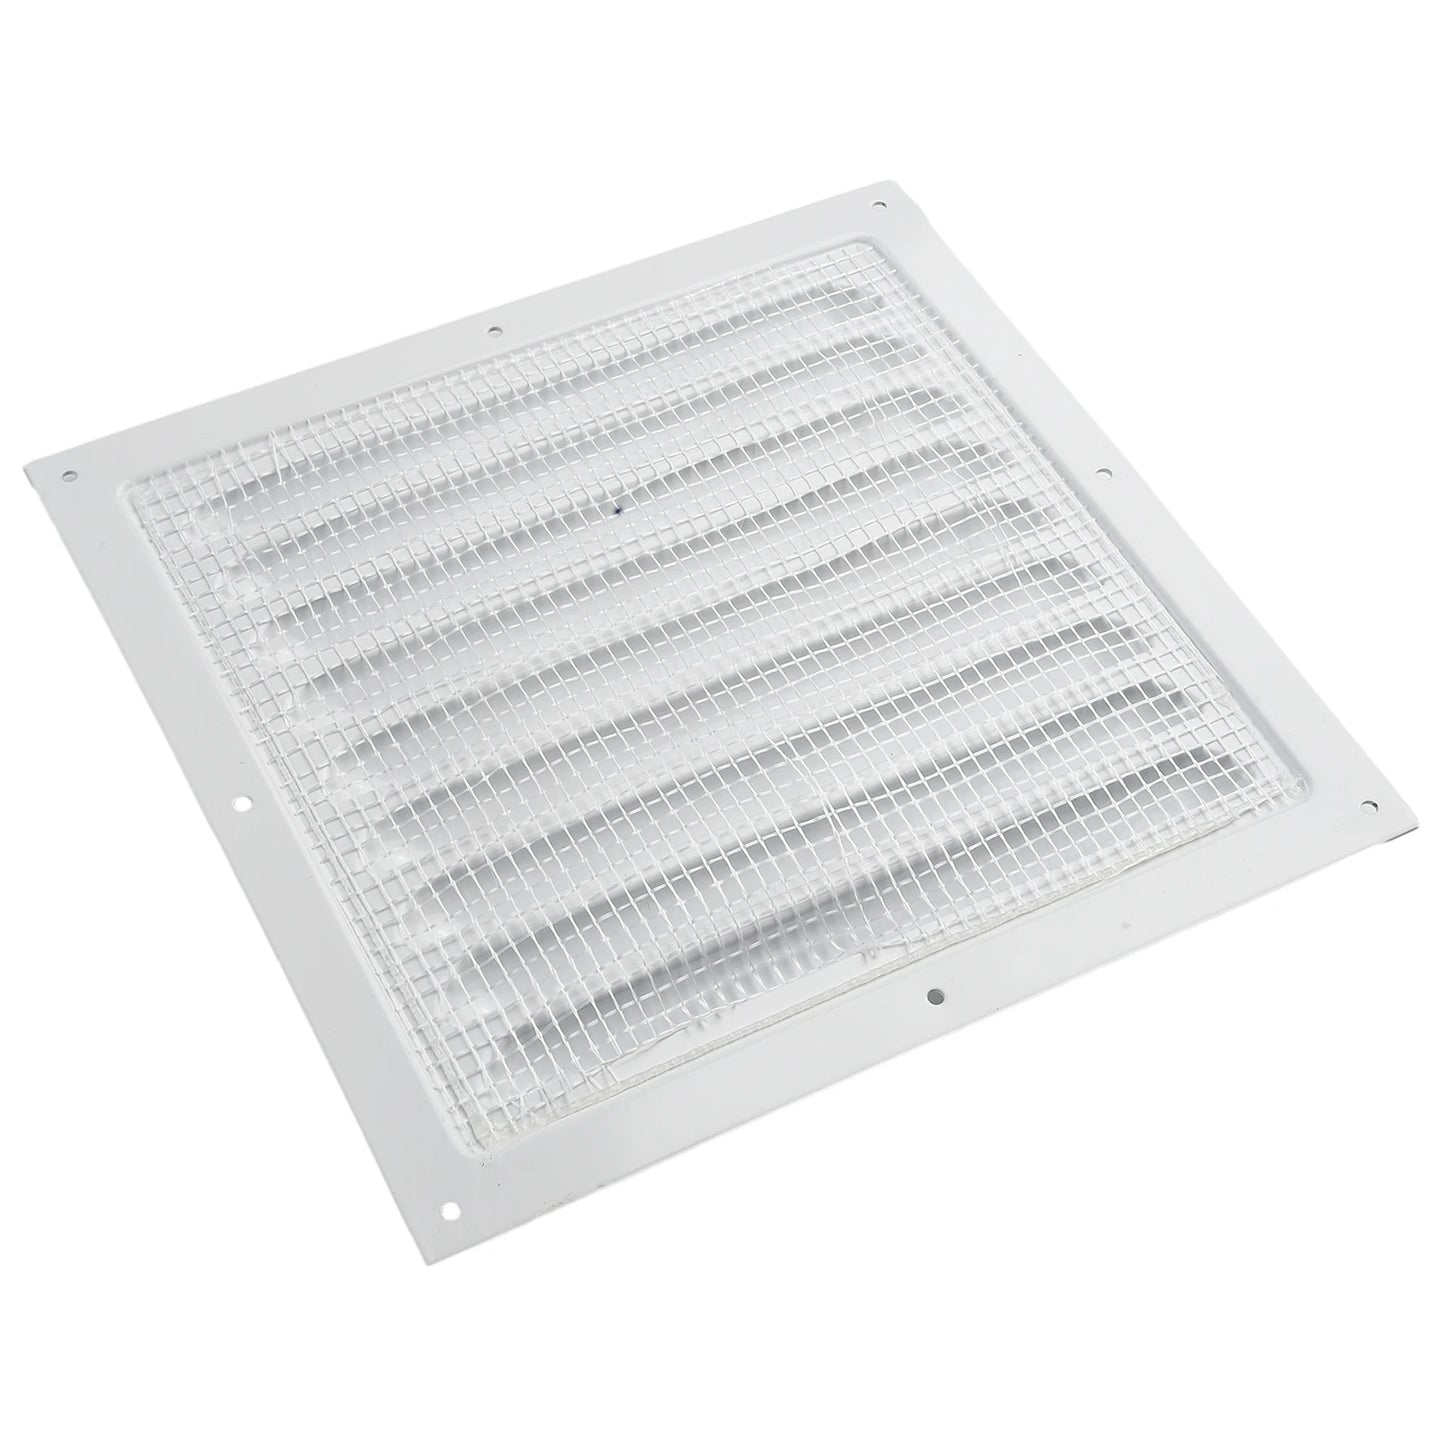 Cover for Air Ventilation Made of Aluminum Alloy Square Aluminium Ventilation Grille with Mosquito Net Ceiling Ventilation Heating Cooling Ventilator Mesh